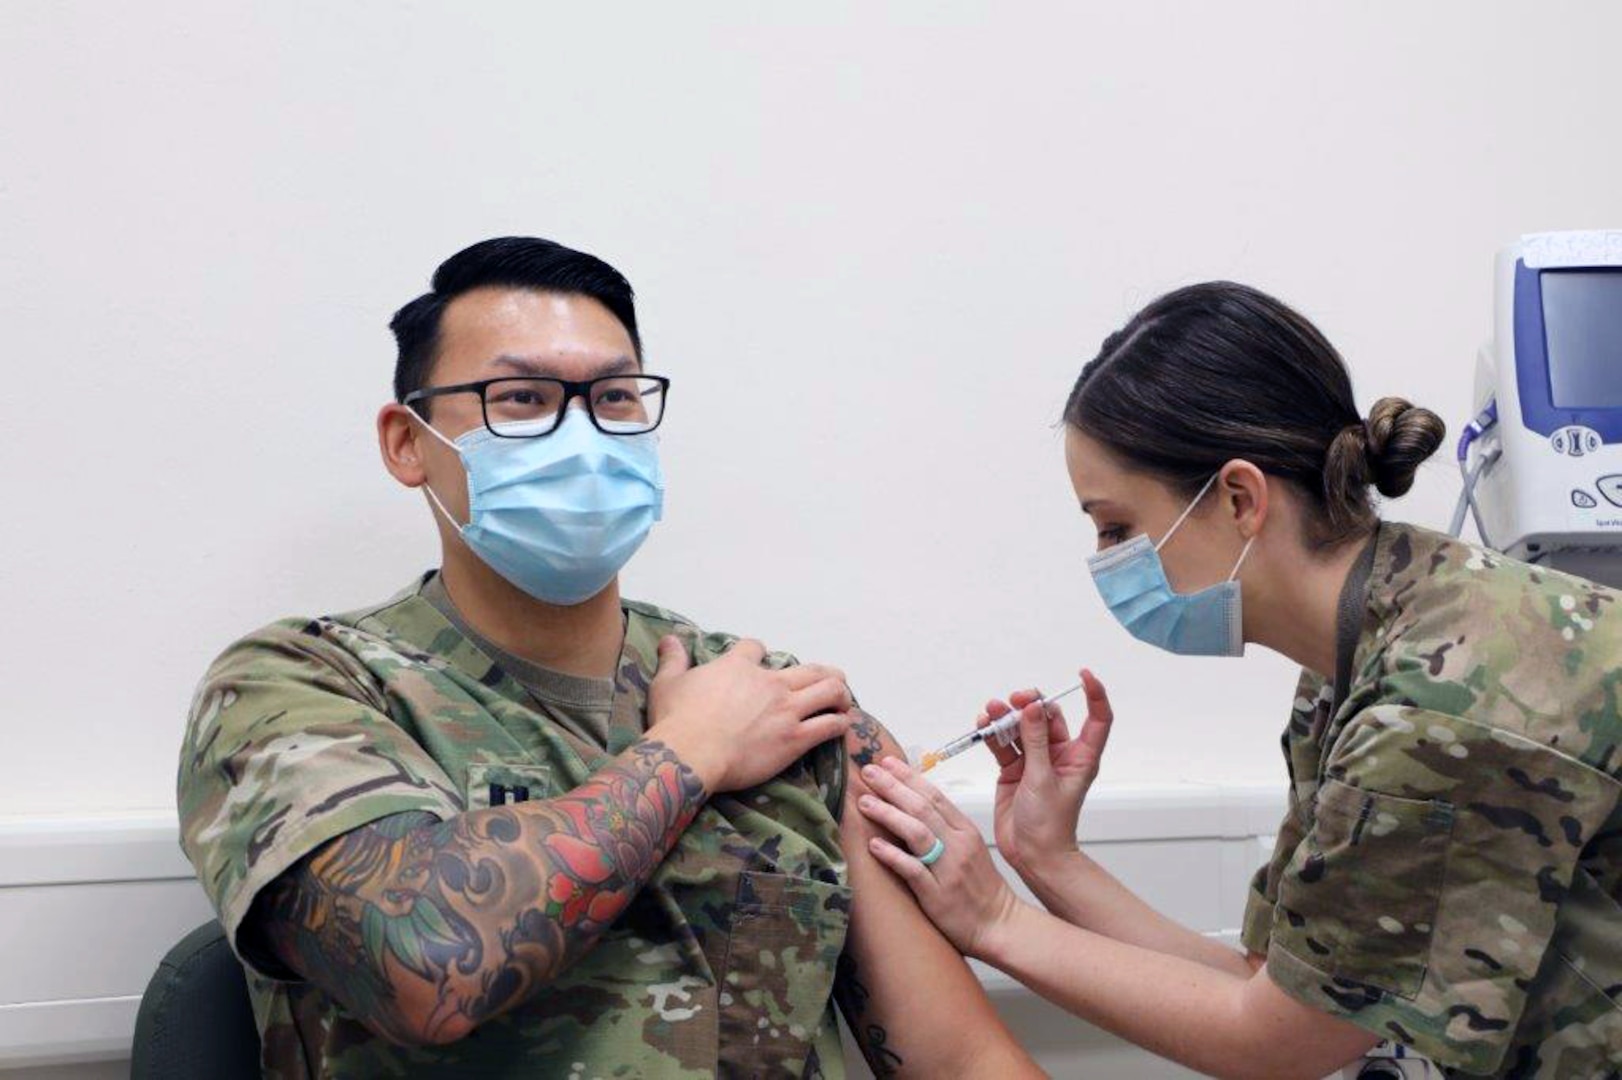 U.S. Army Capt. Joey Nguyen (left), a nurse assigned to 2nd Cavalry Regiment, receives the Moderna COVID-19 vaccine from U.S. Army Capt. Breslin Gillis (right) at the Soldier Readiness Processing Center, Rose Barracks, Vilseck, Germany, Dec. 28, 2020. Nguyen is the first to receive the COVID-19 vaccine in the Vilseck military community.